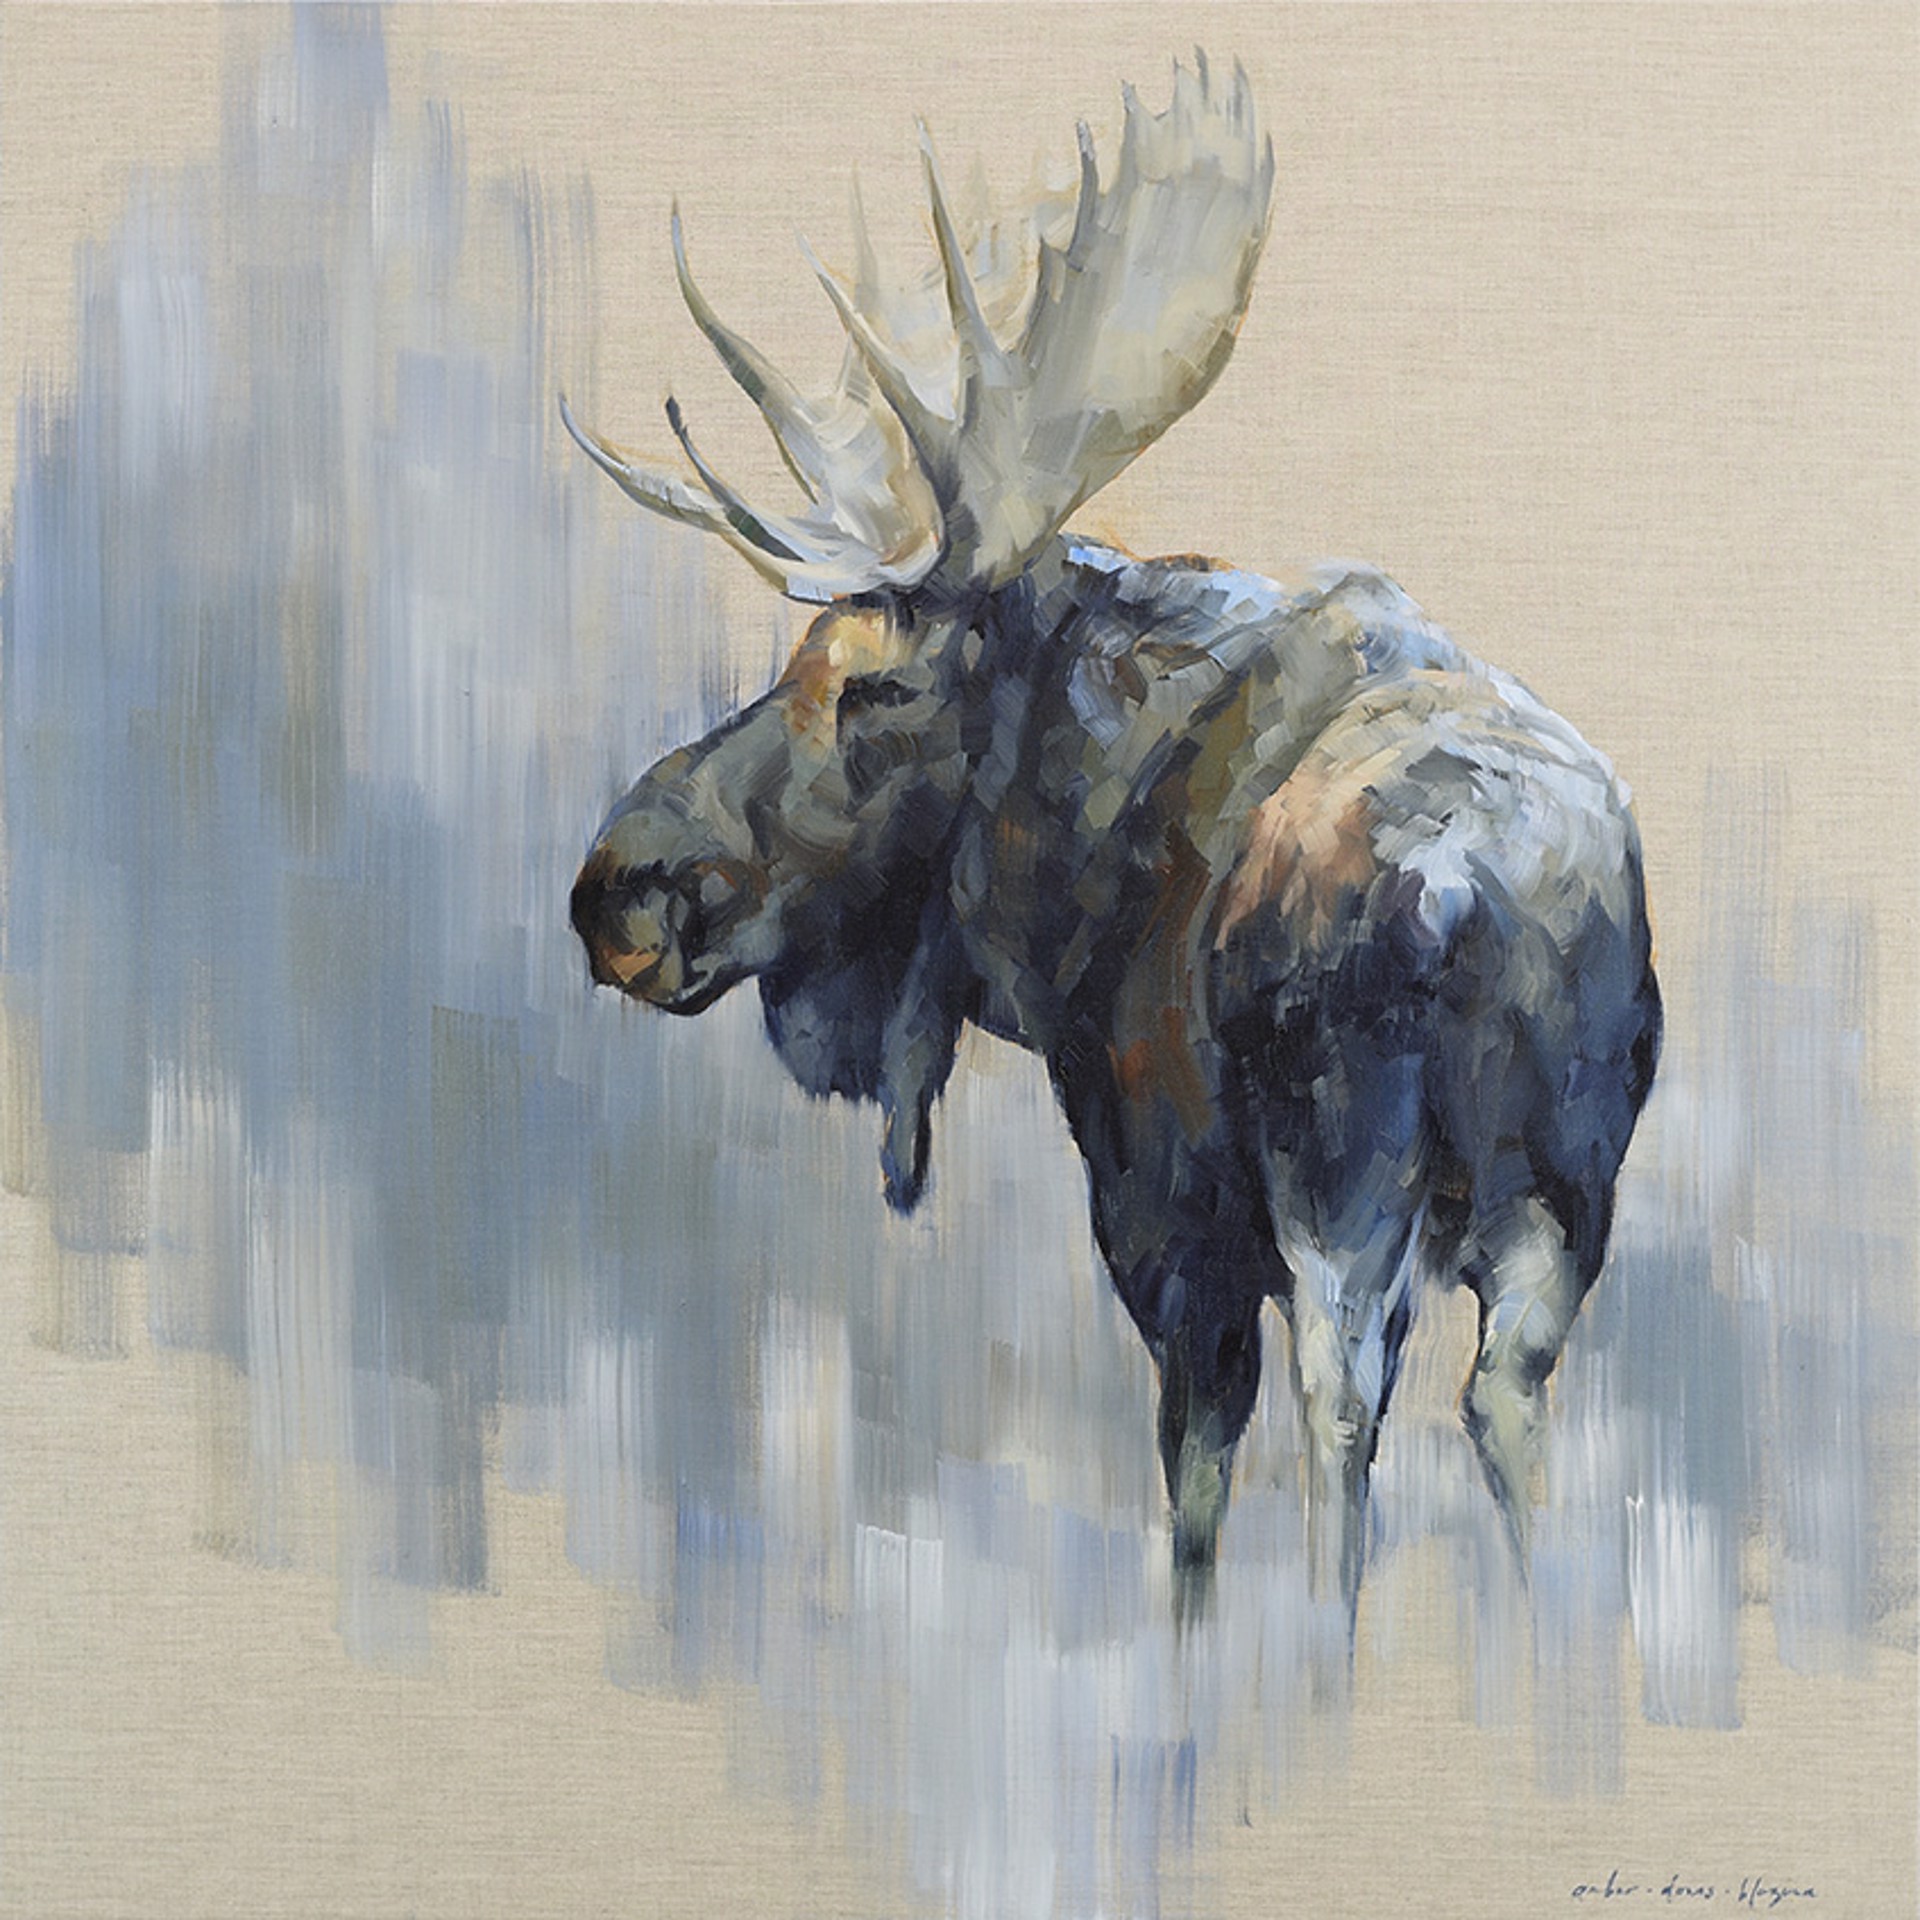 A Contemporary Oil Painting Featuring A Bull Moose Looking Back At The Viewer With An Abstract Tan And Grey Background, By Amber Blazina, Available At Gallery Wild